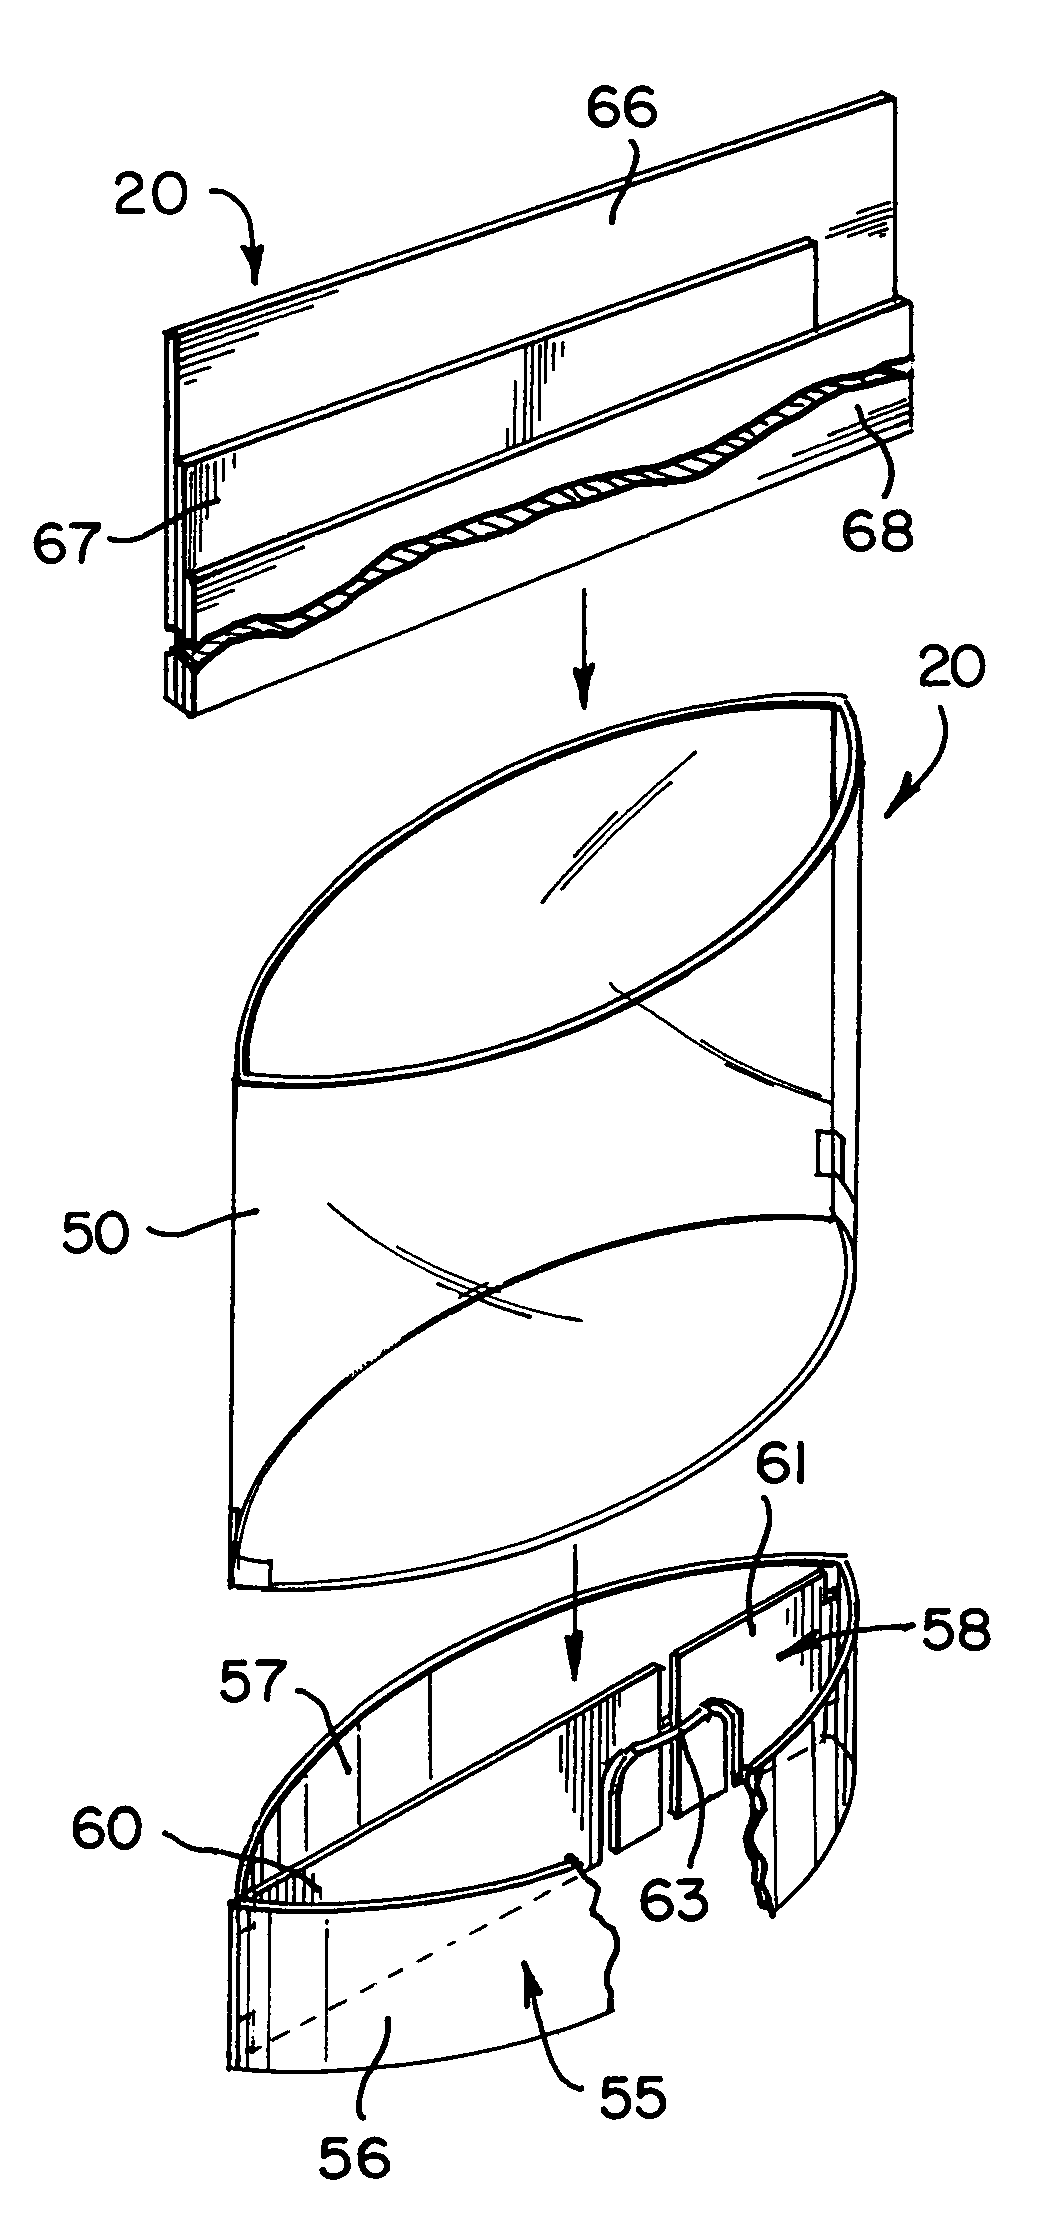 Three-dimensional forming display system